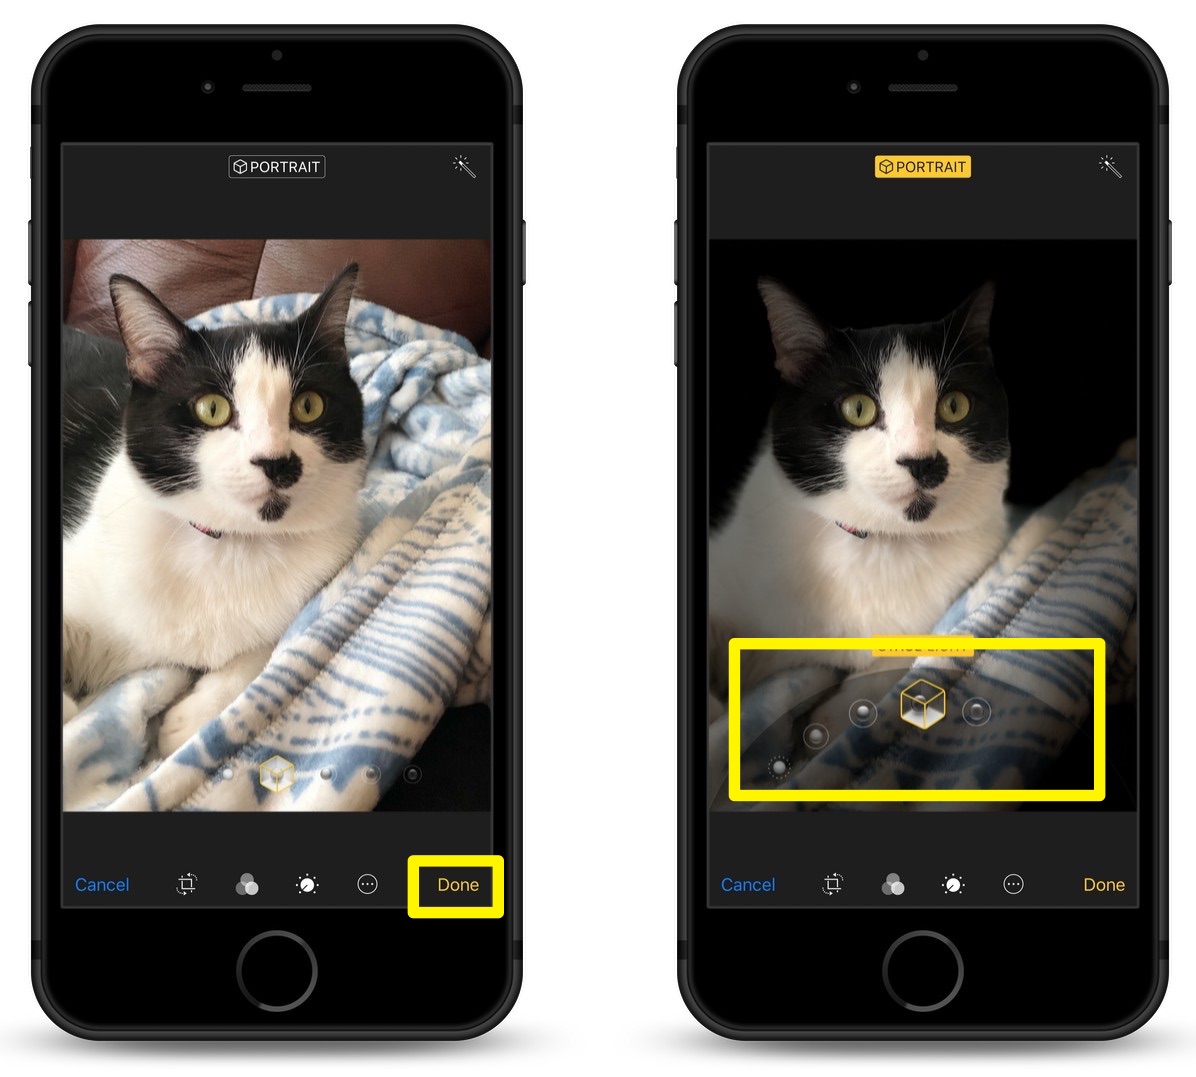 How To Turn Off or Adjust Portrait Mode on a Saved Photo on Your iPhone